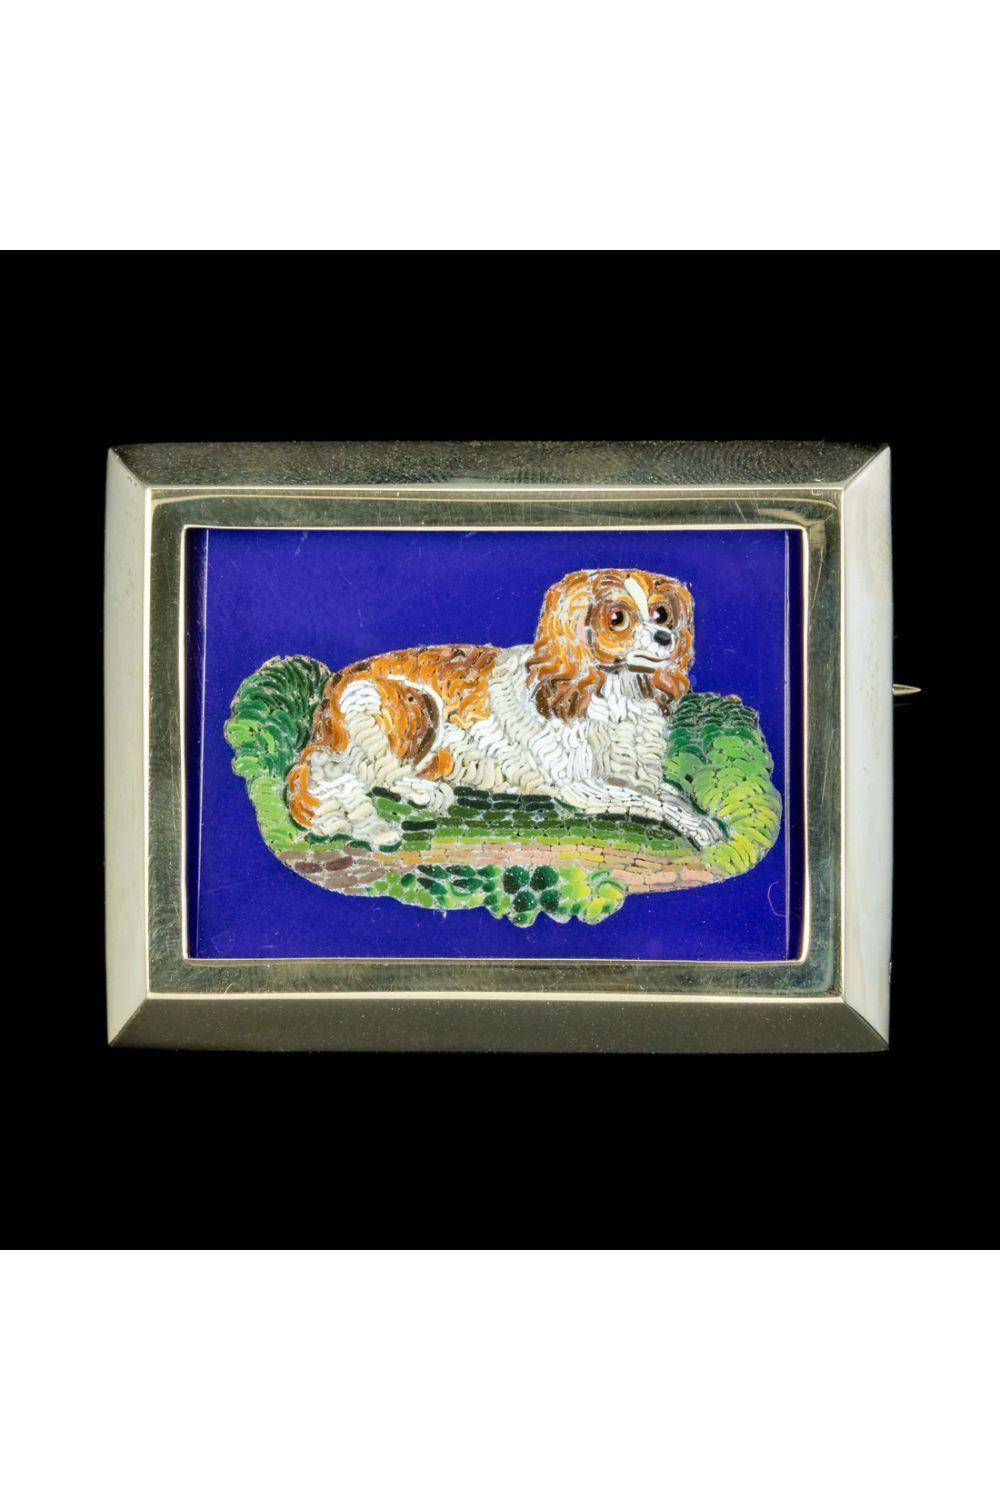 A delightful Antique Victorian Micro Mosaic depicting an adorable King Charles Spaniel laid upon a bed of green grass. The level of detail is astonishing, with realistic colouring and shading inlaid expertly into the blue setting by a true master of